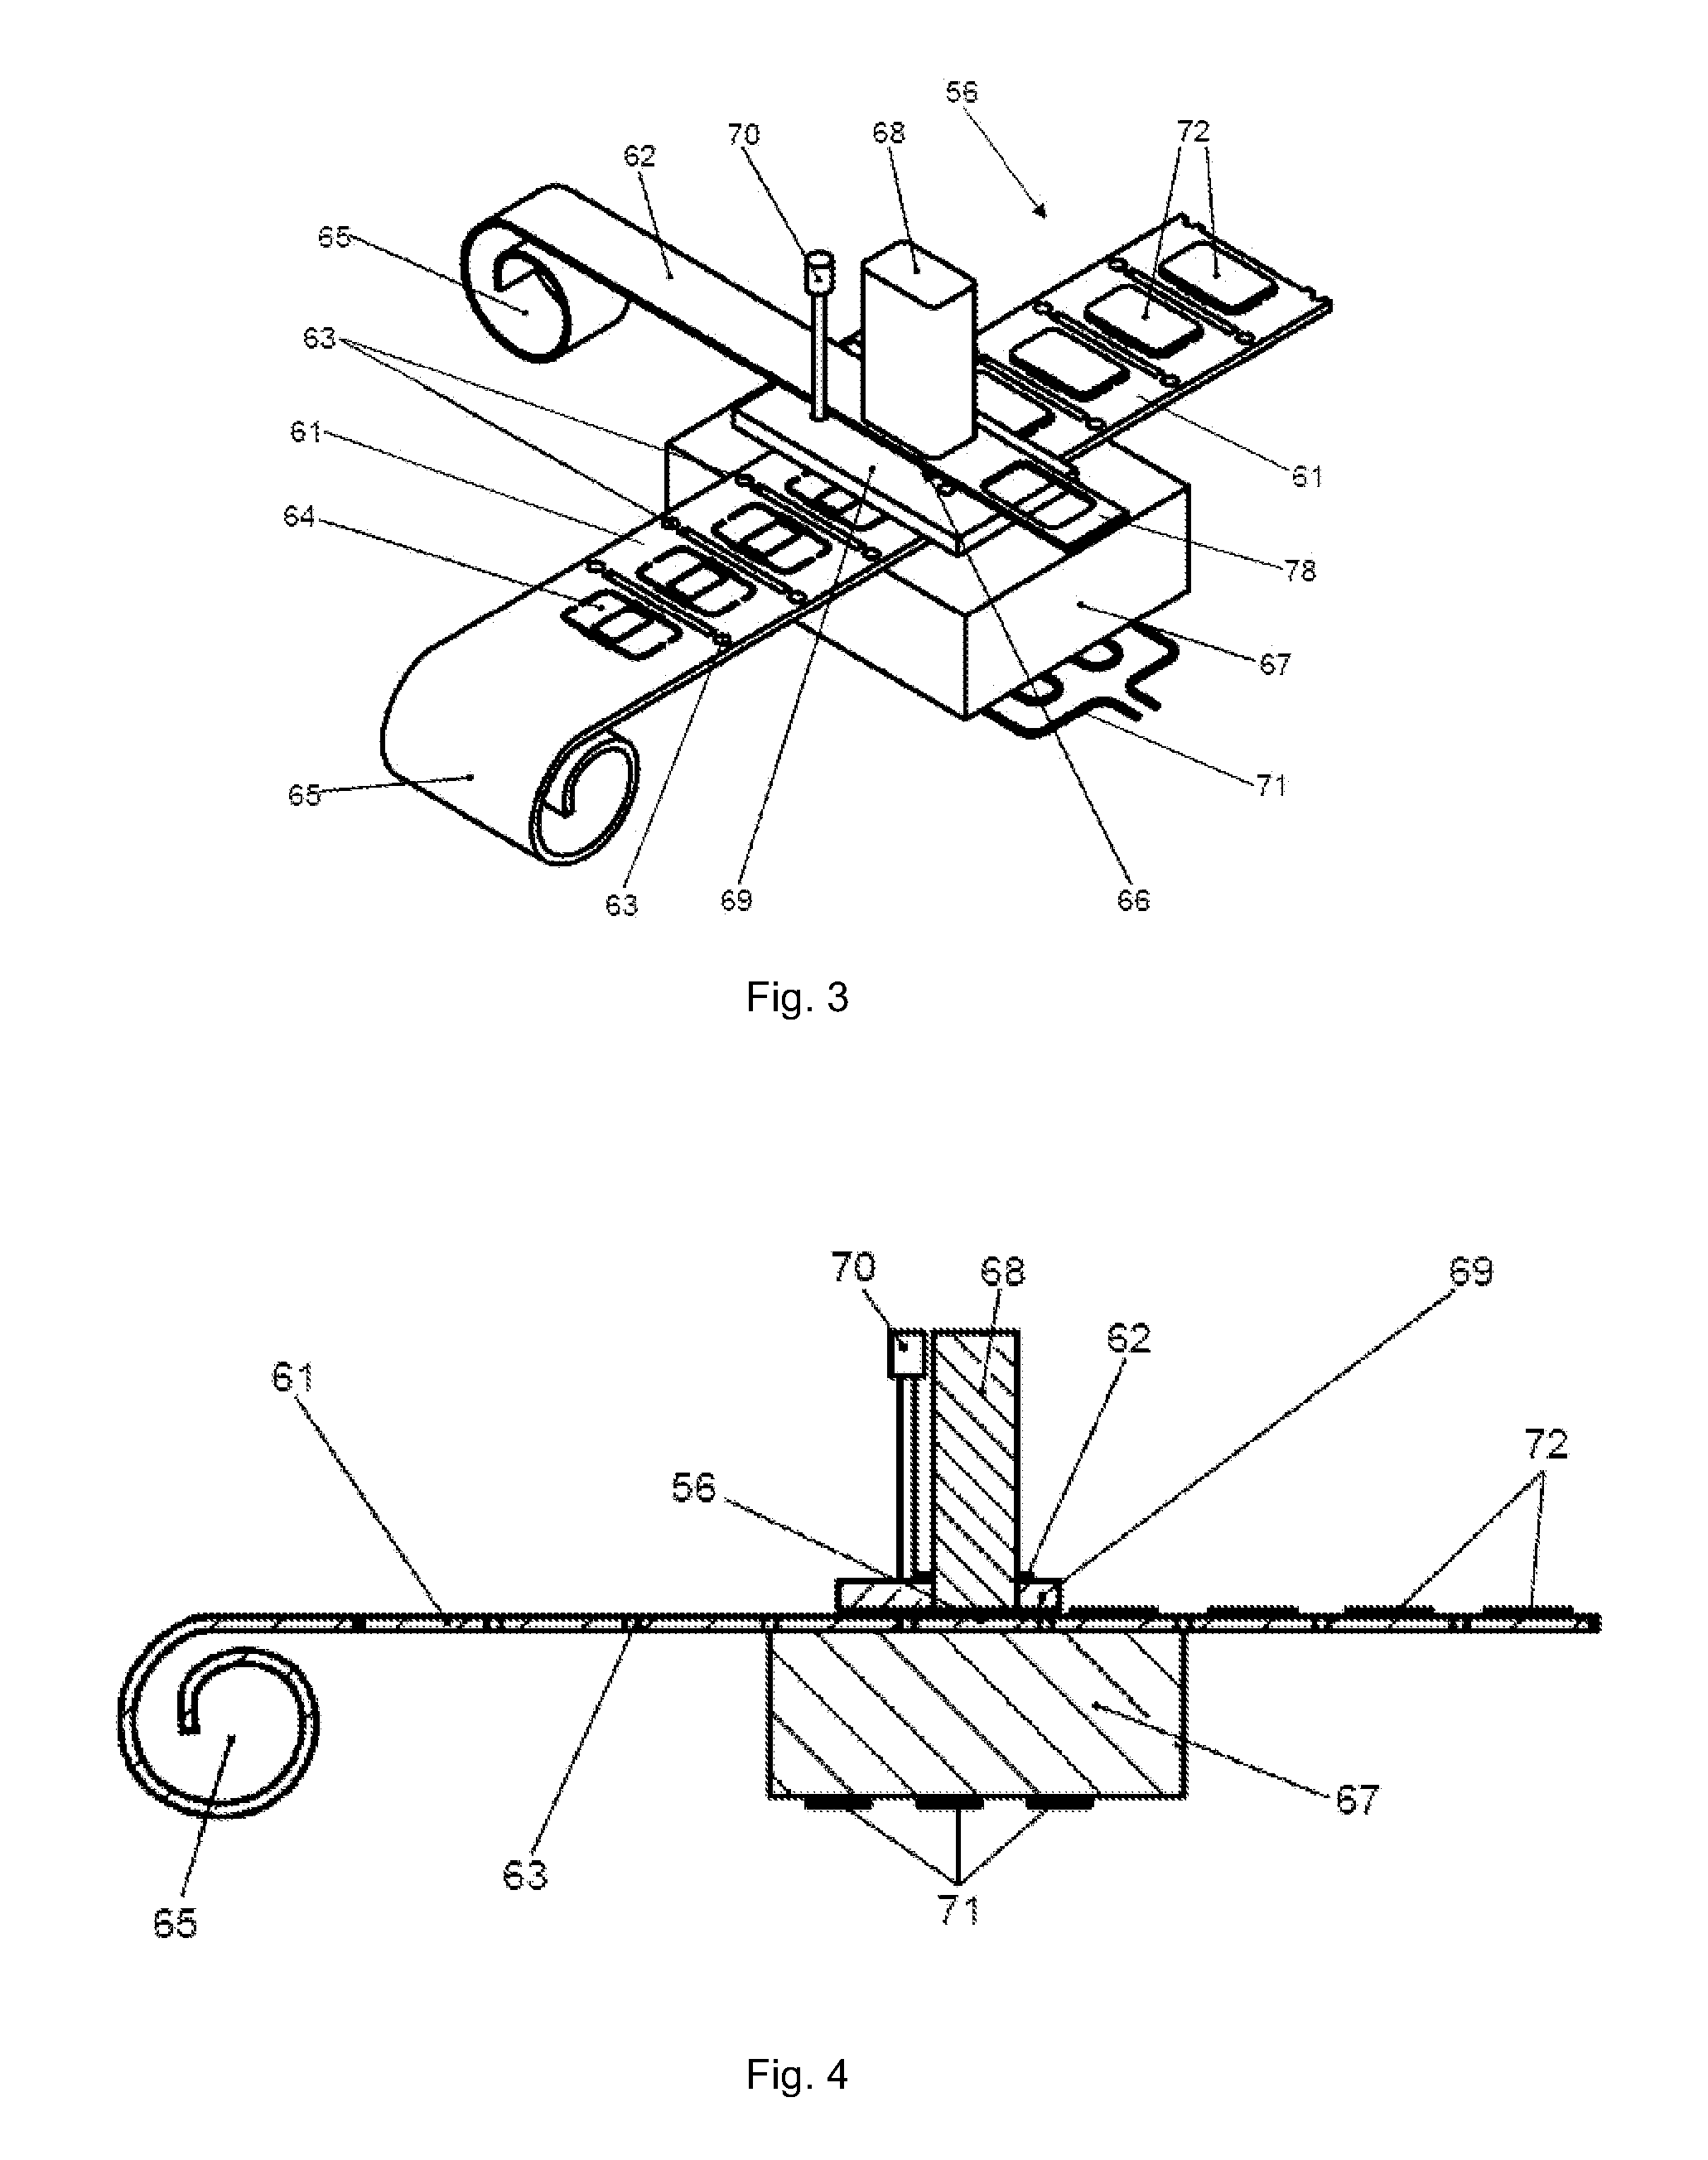 Method for partial lamination of flexible substrates